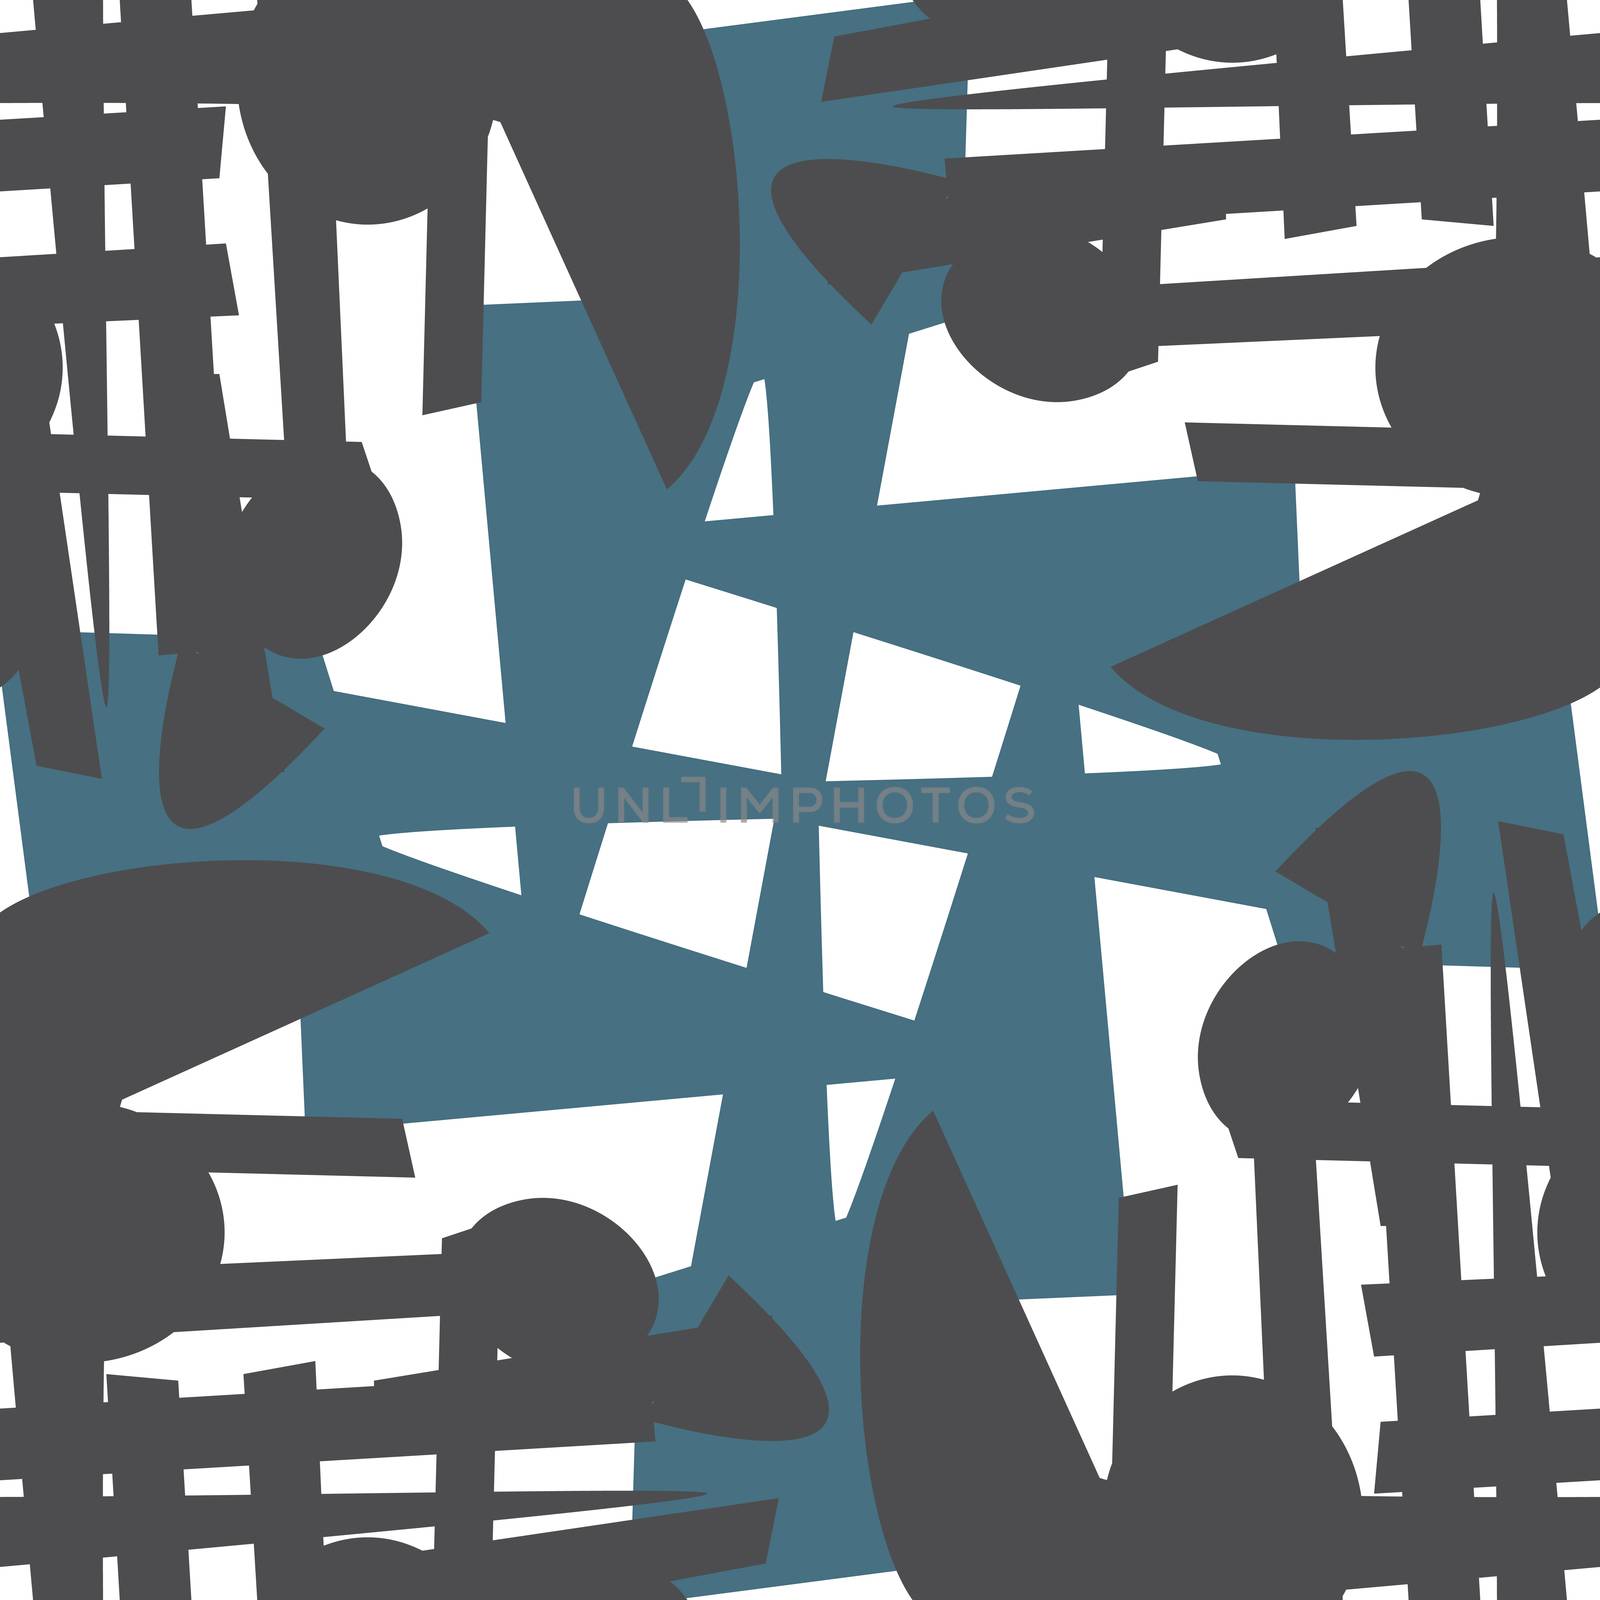 Repeating Pattern of Blue and Gray Shapes by TheBlackRhino